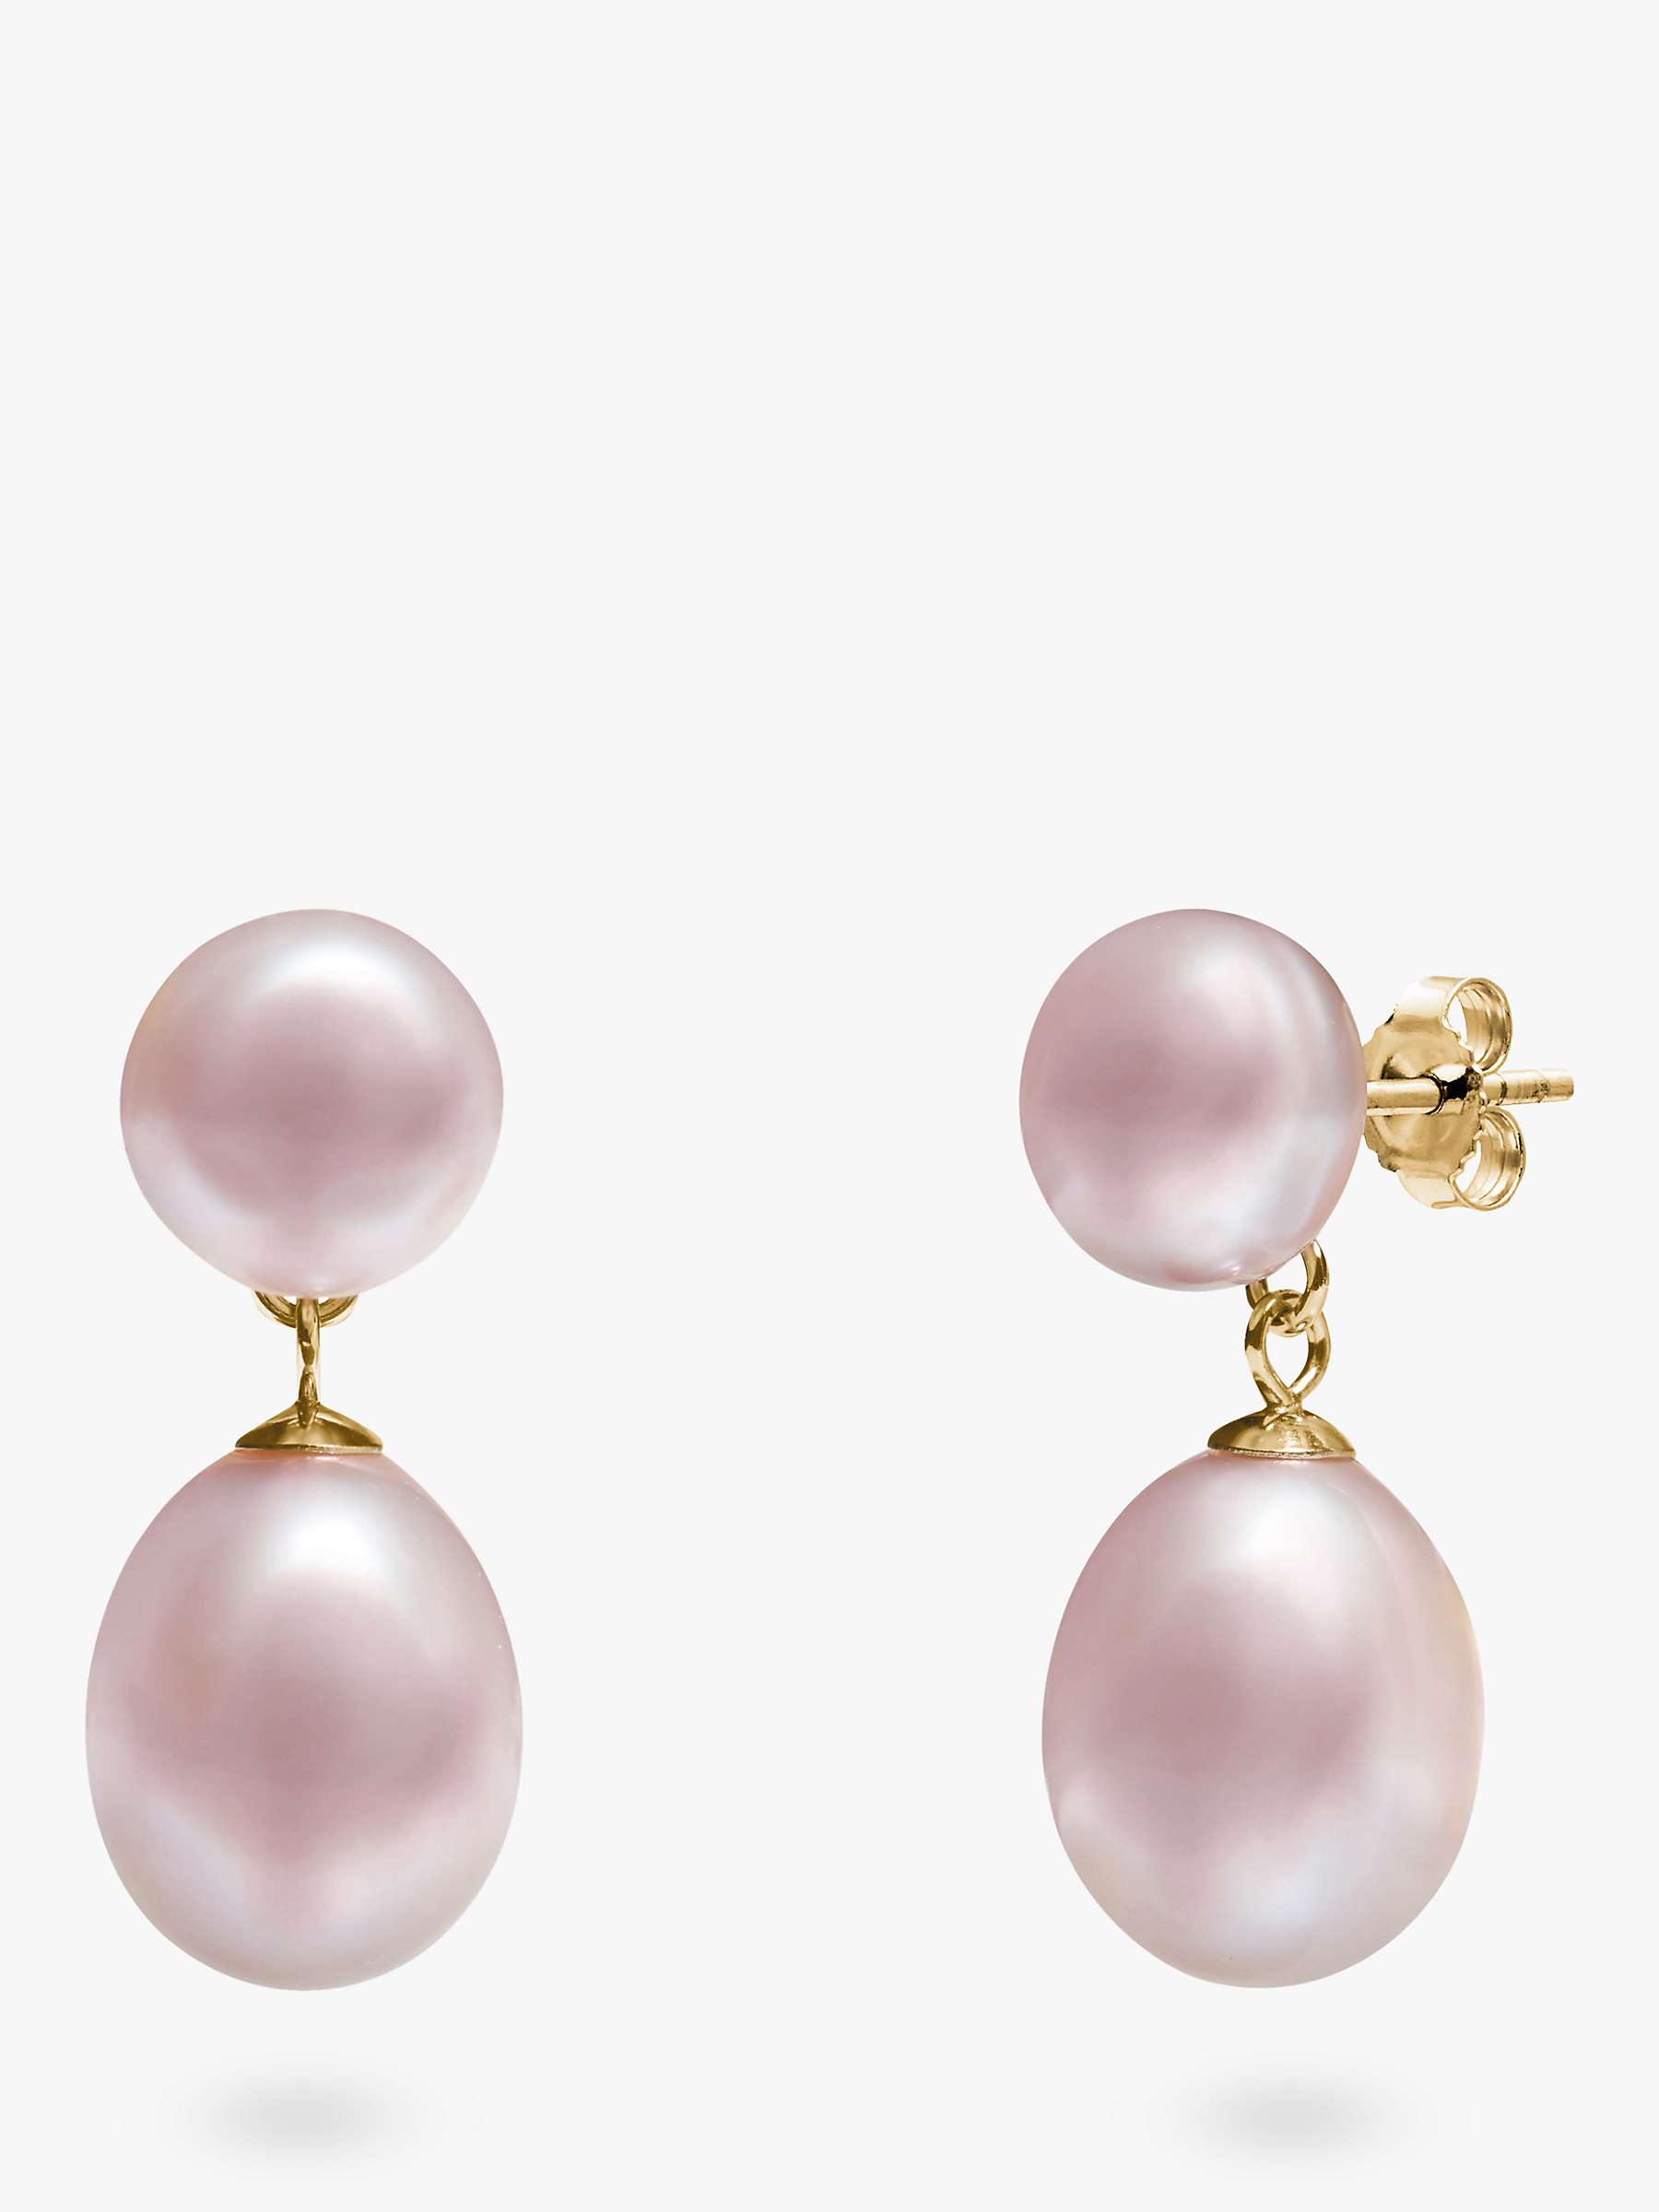 Buy A B Davis 9ct Gold Freshwater Pearl Double Drop Earrings Online at johnlewis.com